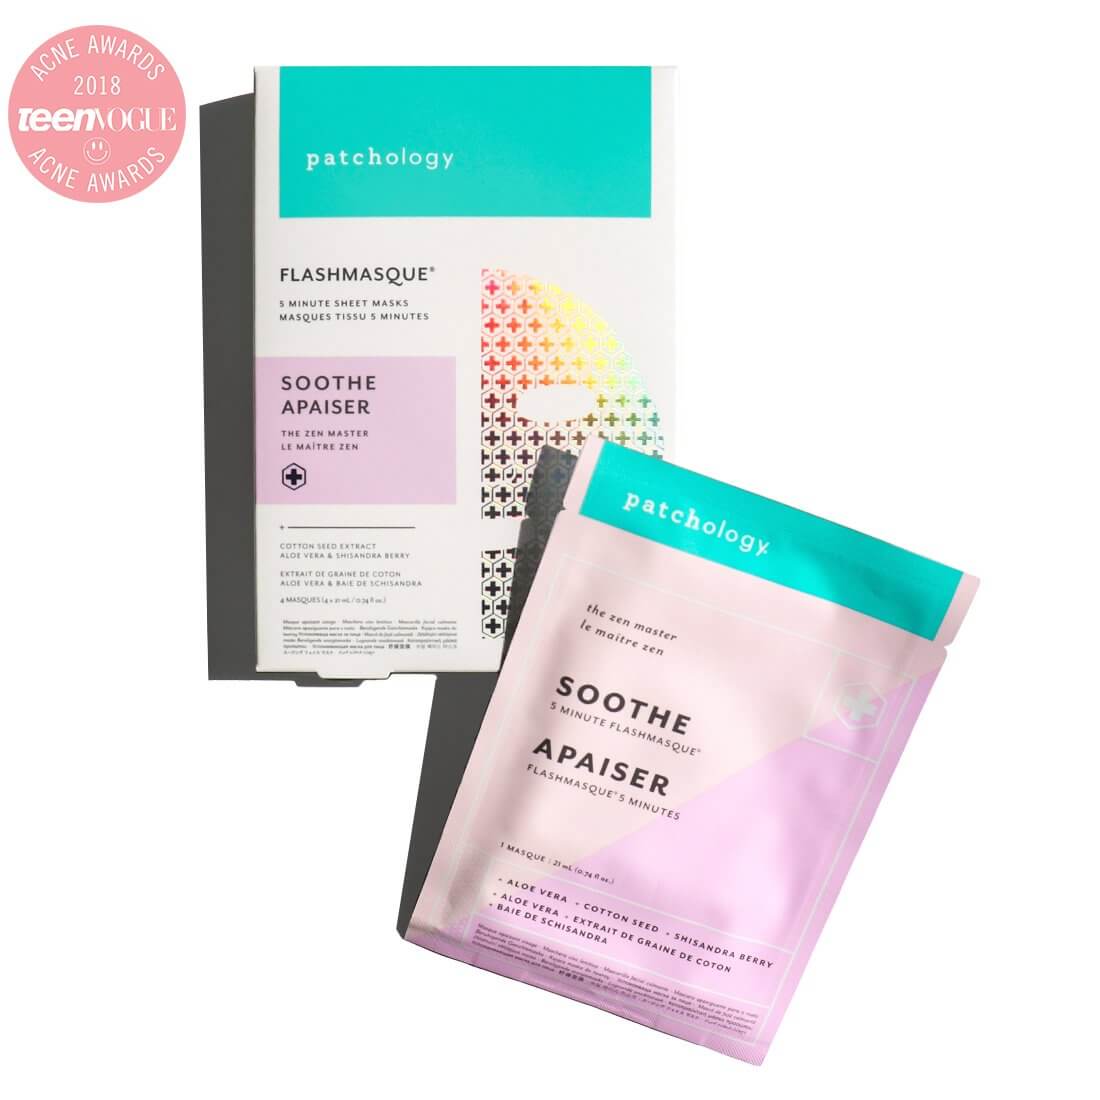 Soothe 5 Minute Flashmasque